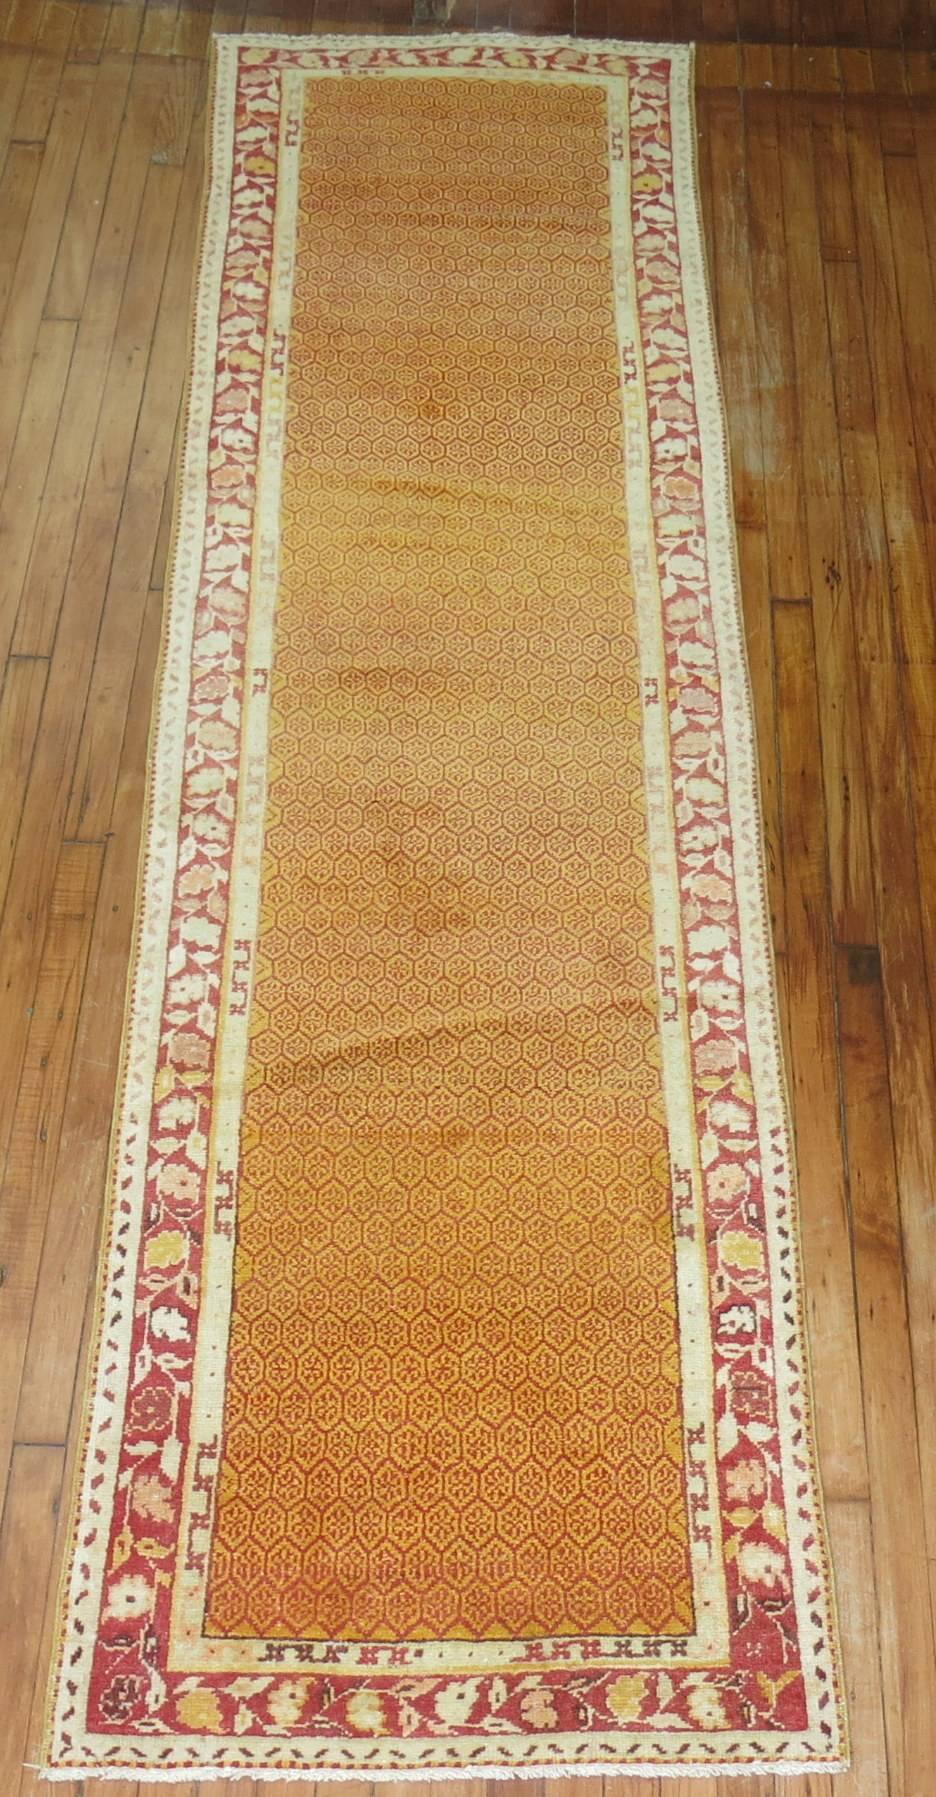 Vintage Turkish Anatolian runner with an interesting repetitive design on an orange peel background.